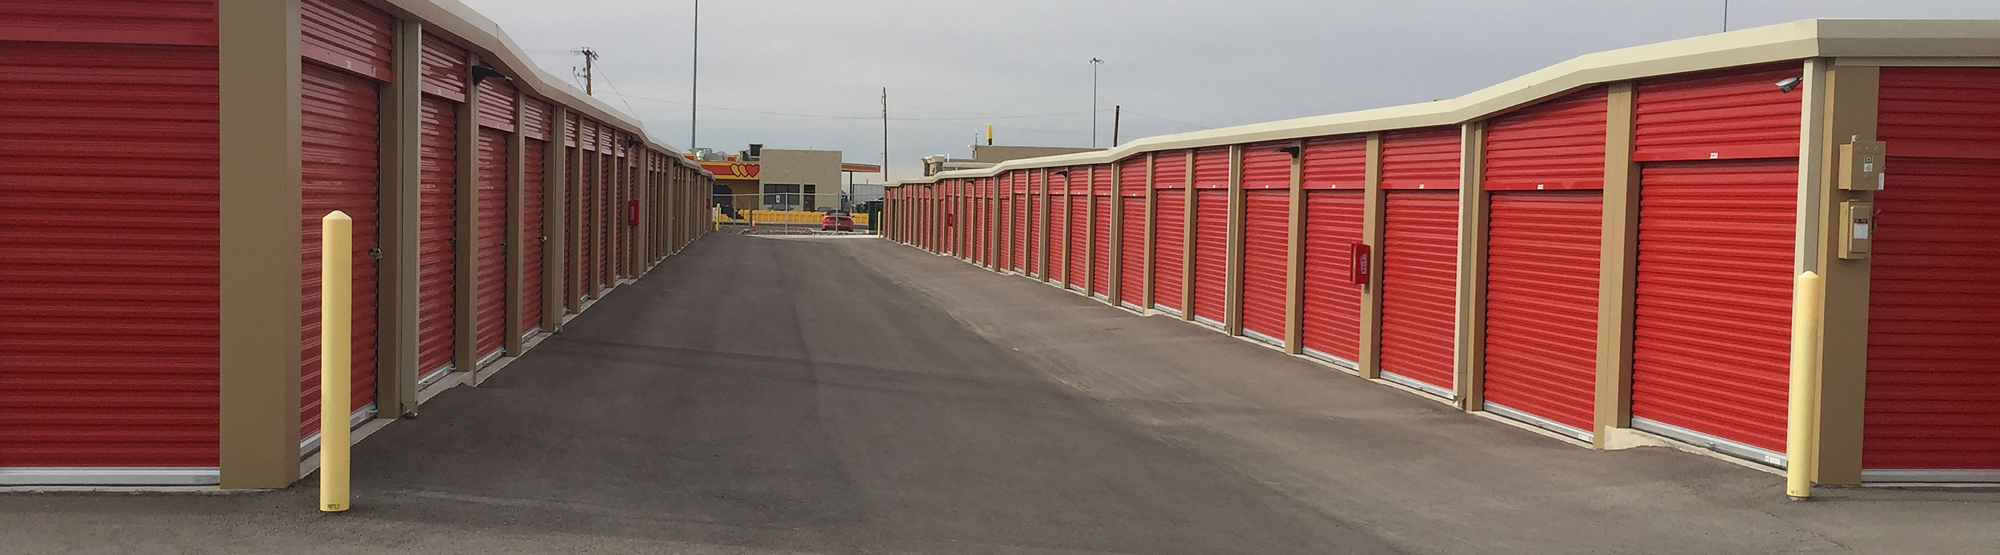 Drive-up Access at Love's Storage